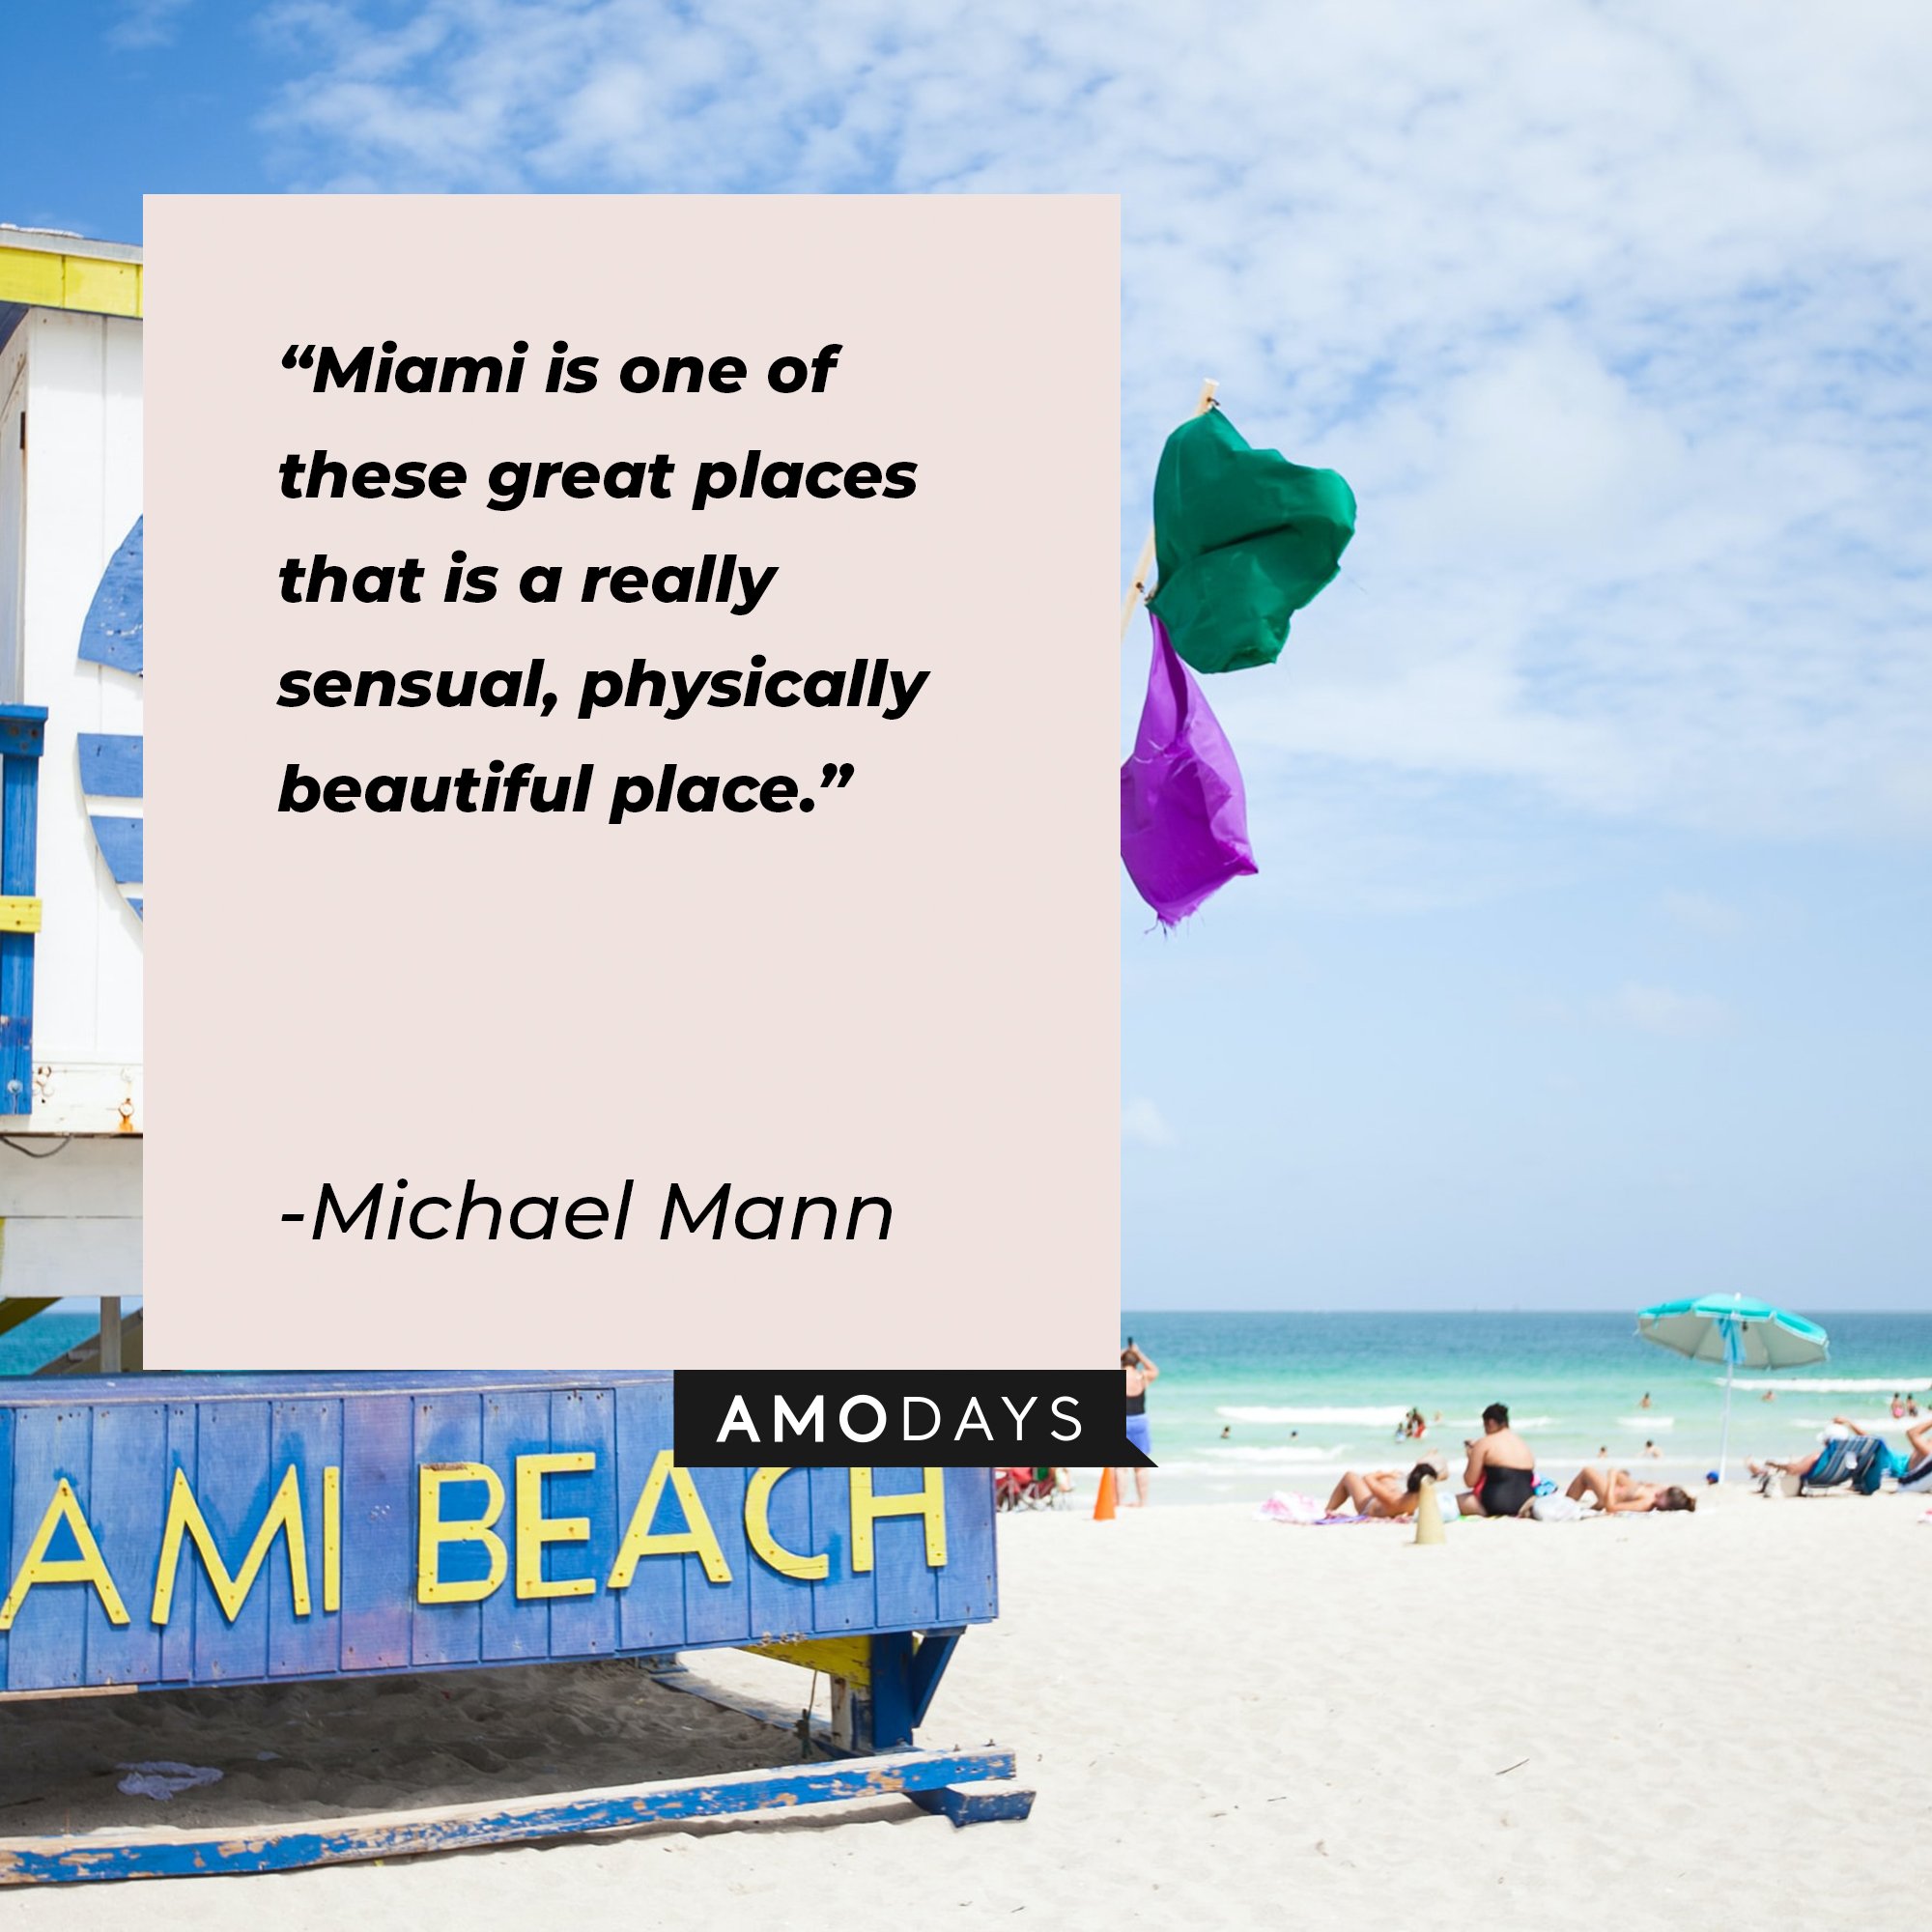 Michael Mann’s quote:  "Miami is one of these great places that is a really sensual, physically beautiful place." | Image: AmoDays